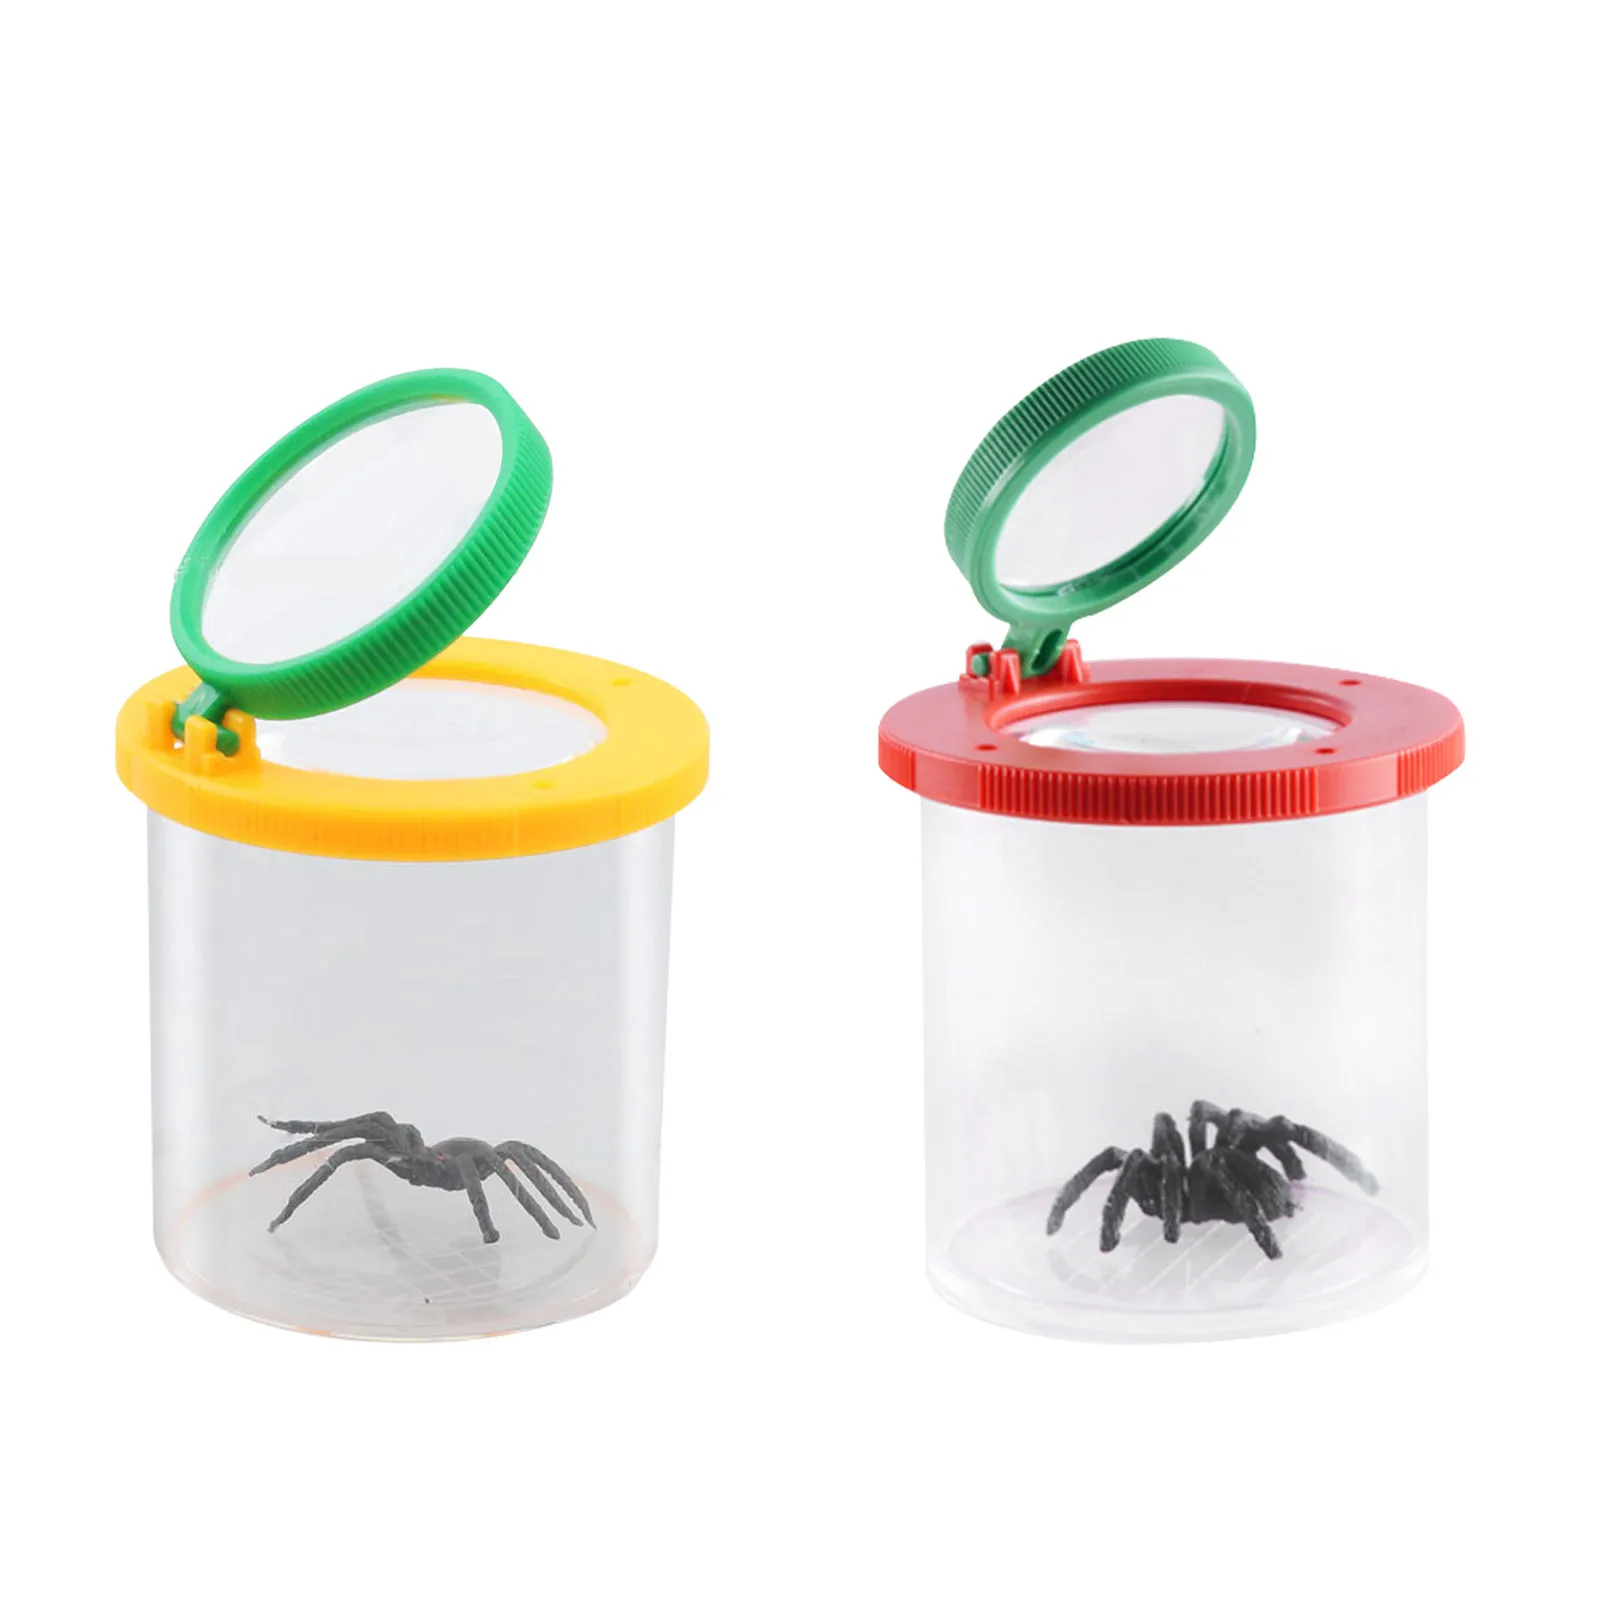 

Insect Observation Cage Insect Observation Box With Magnifier Insert InsectViewer Magnifier Backyard Explorer Insect Insect